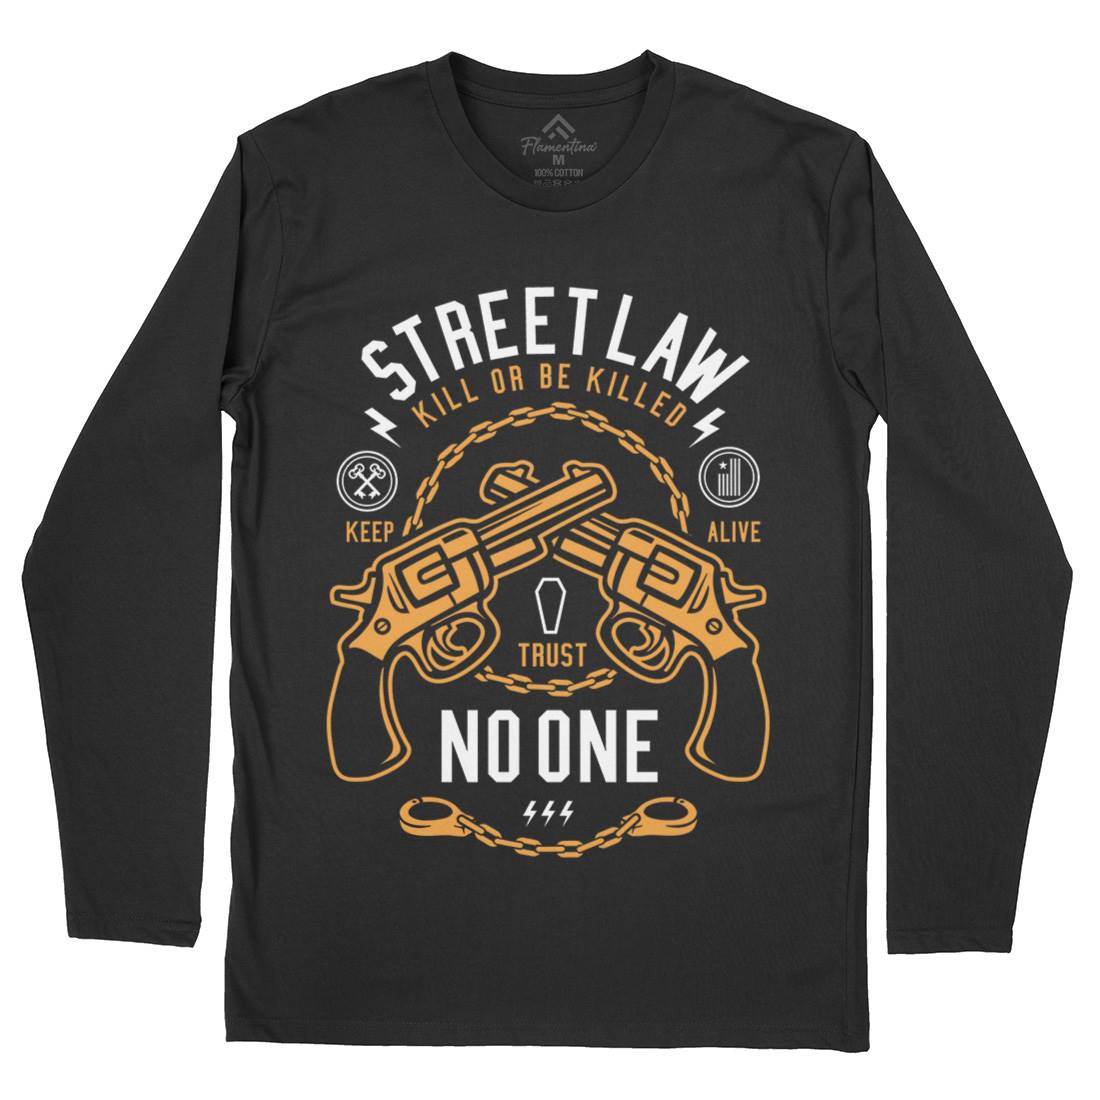 Street Law Mens Long Sleeve T-Shirt Quotes A286